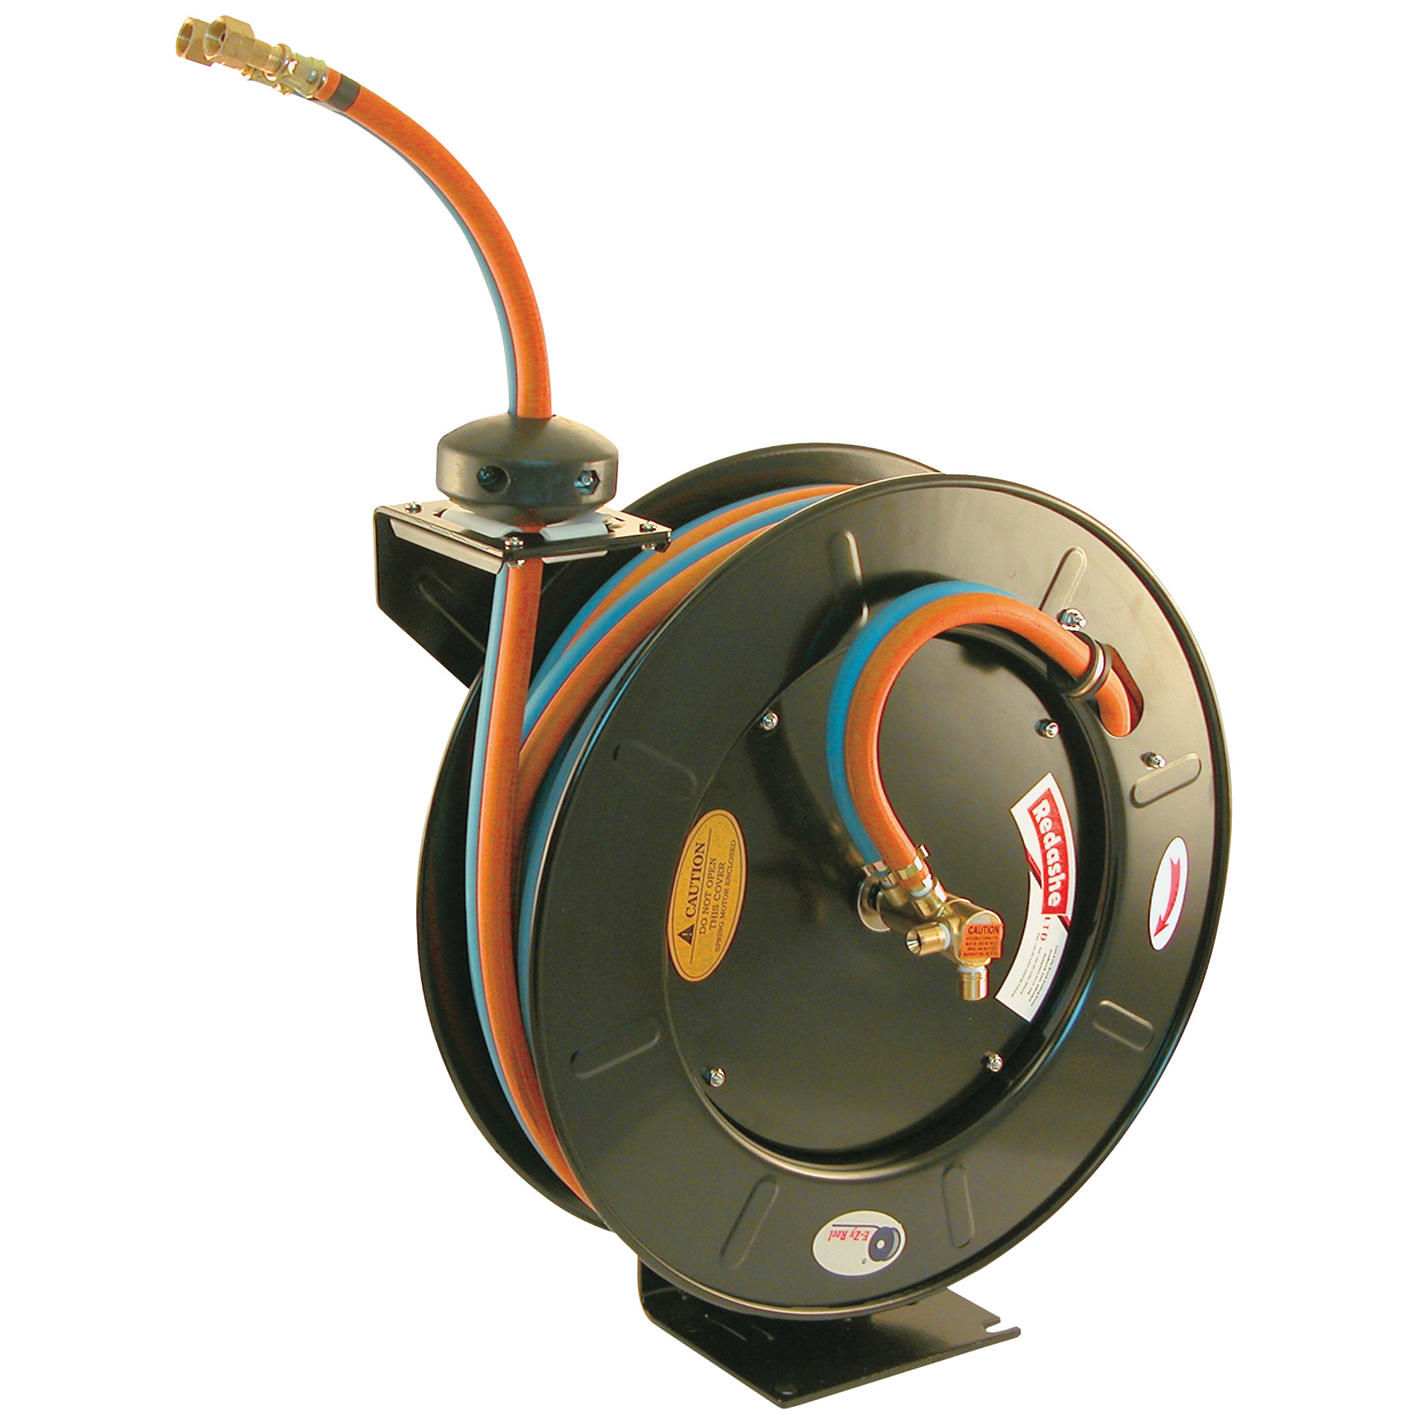 Oxy-Propane Welding Hose Reel complete with Hose